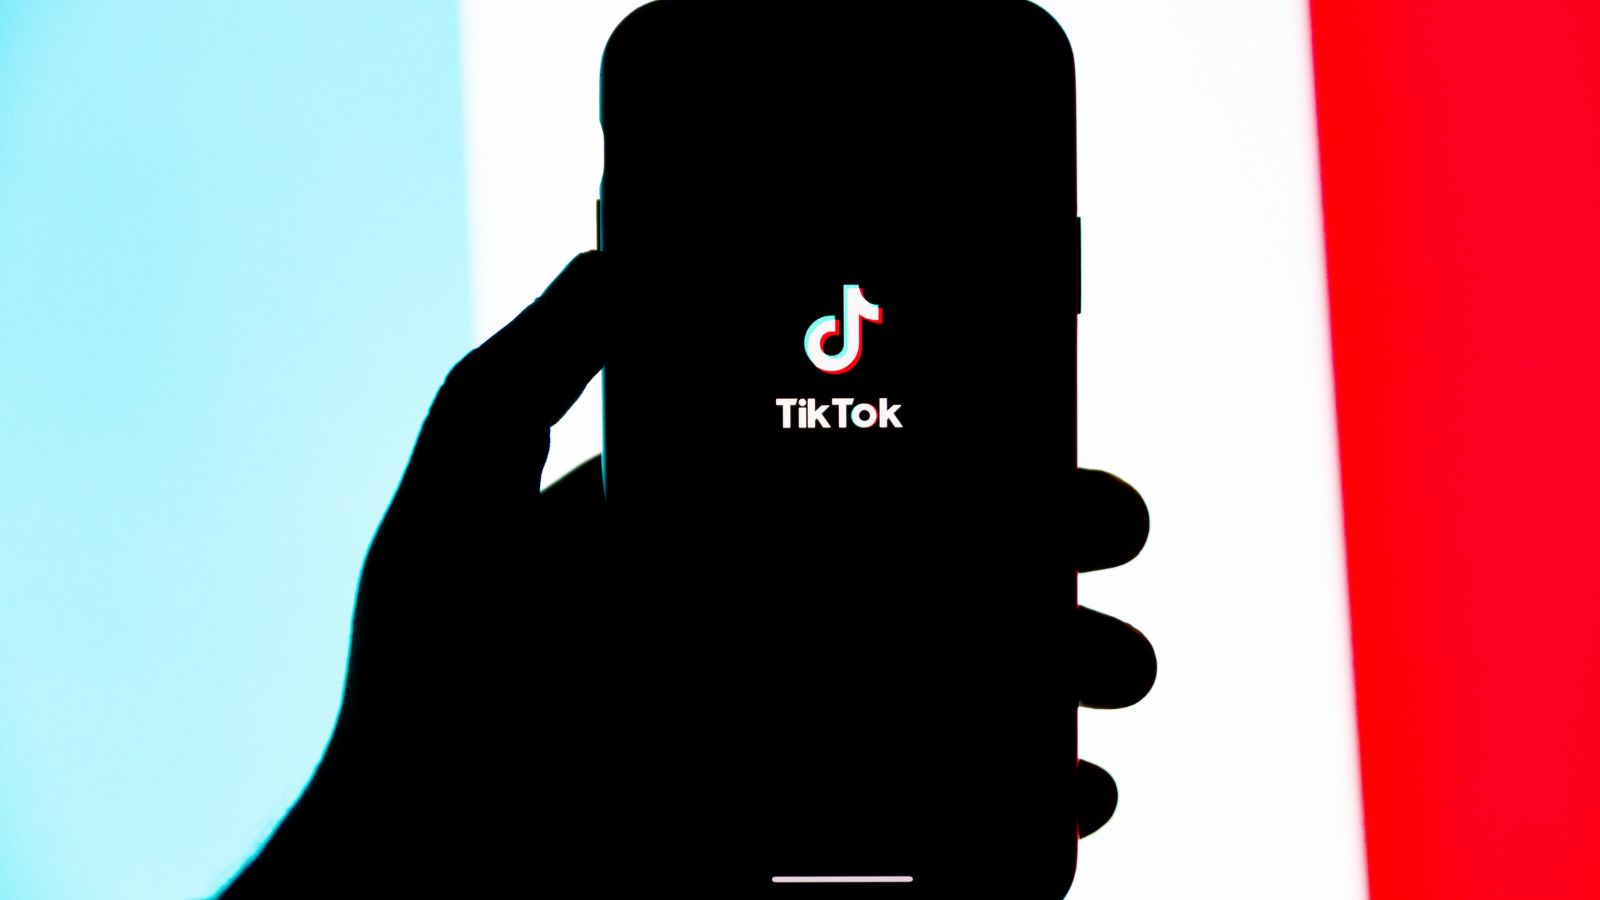 What Are Tiktok Gifts? Price List and Uses Explained - PC Guide